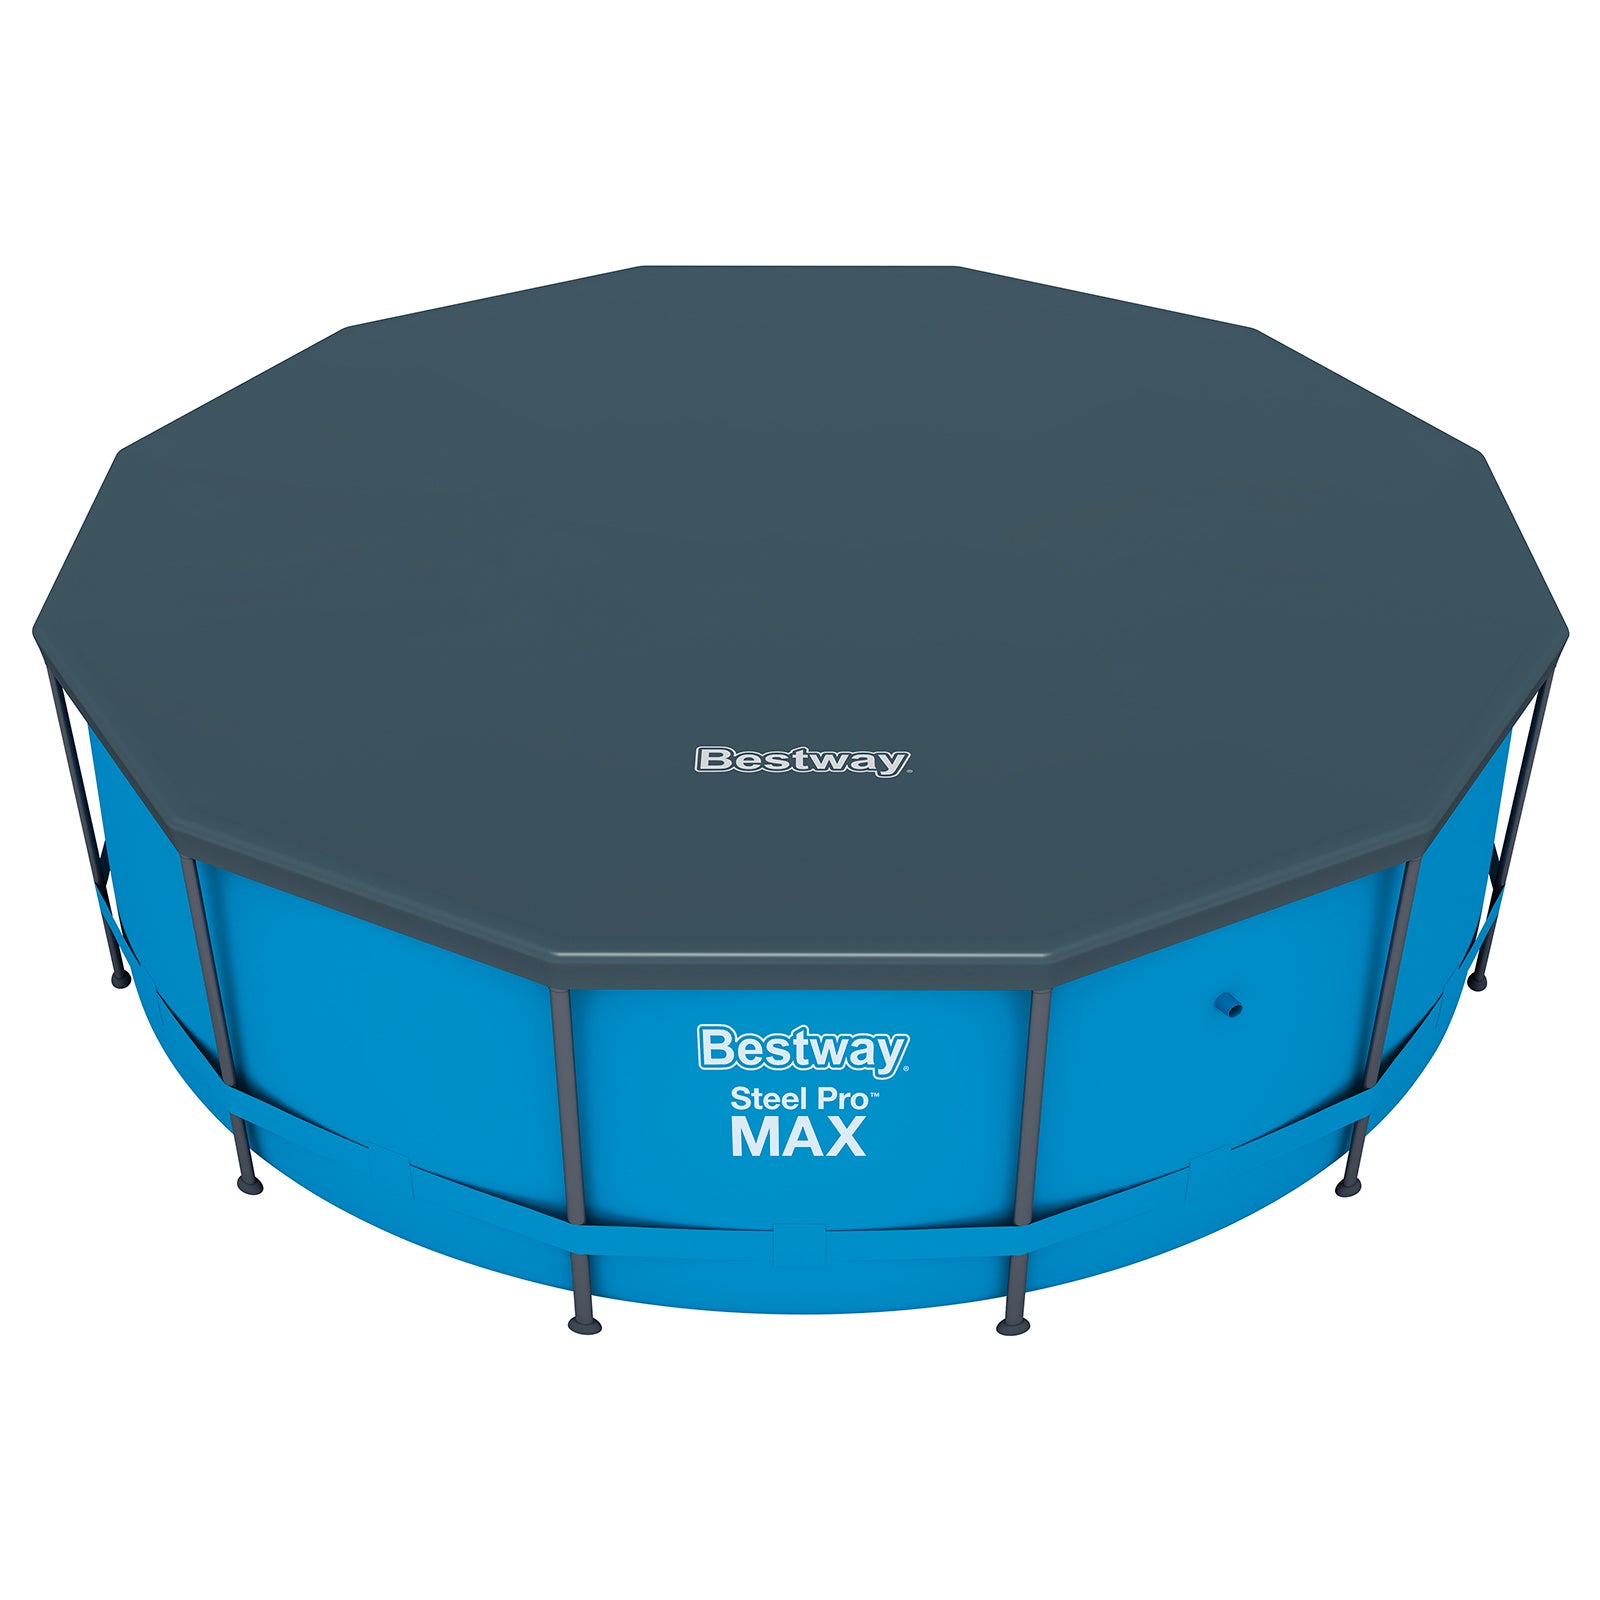 Bestway Premium PVC Pool Cover for 3.66 / 12ft Round Pool - 58037